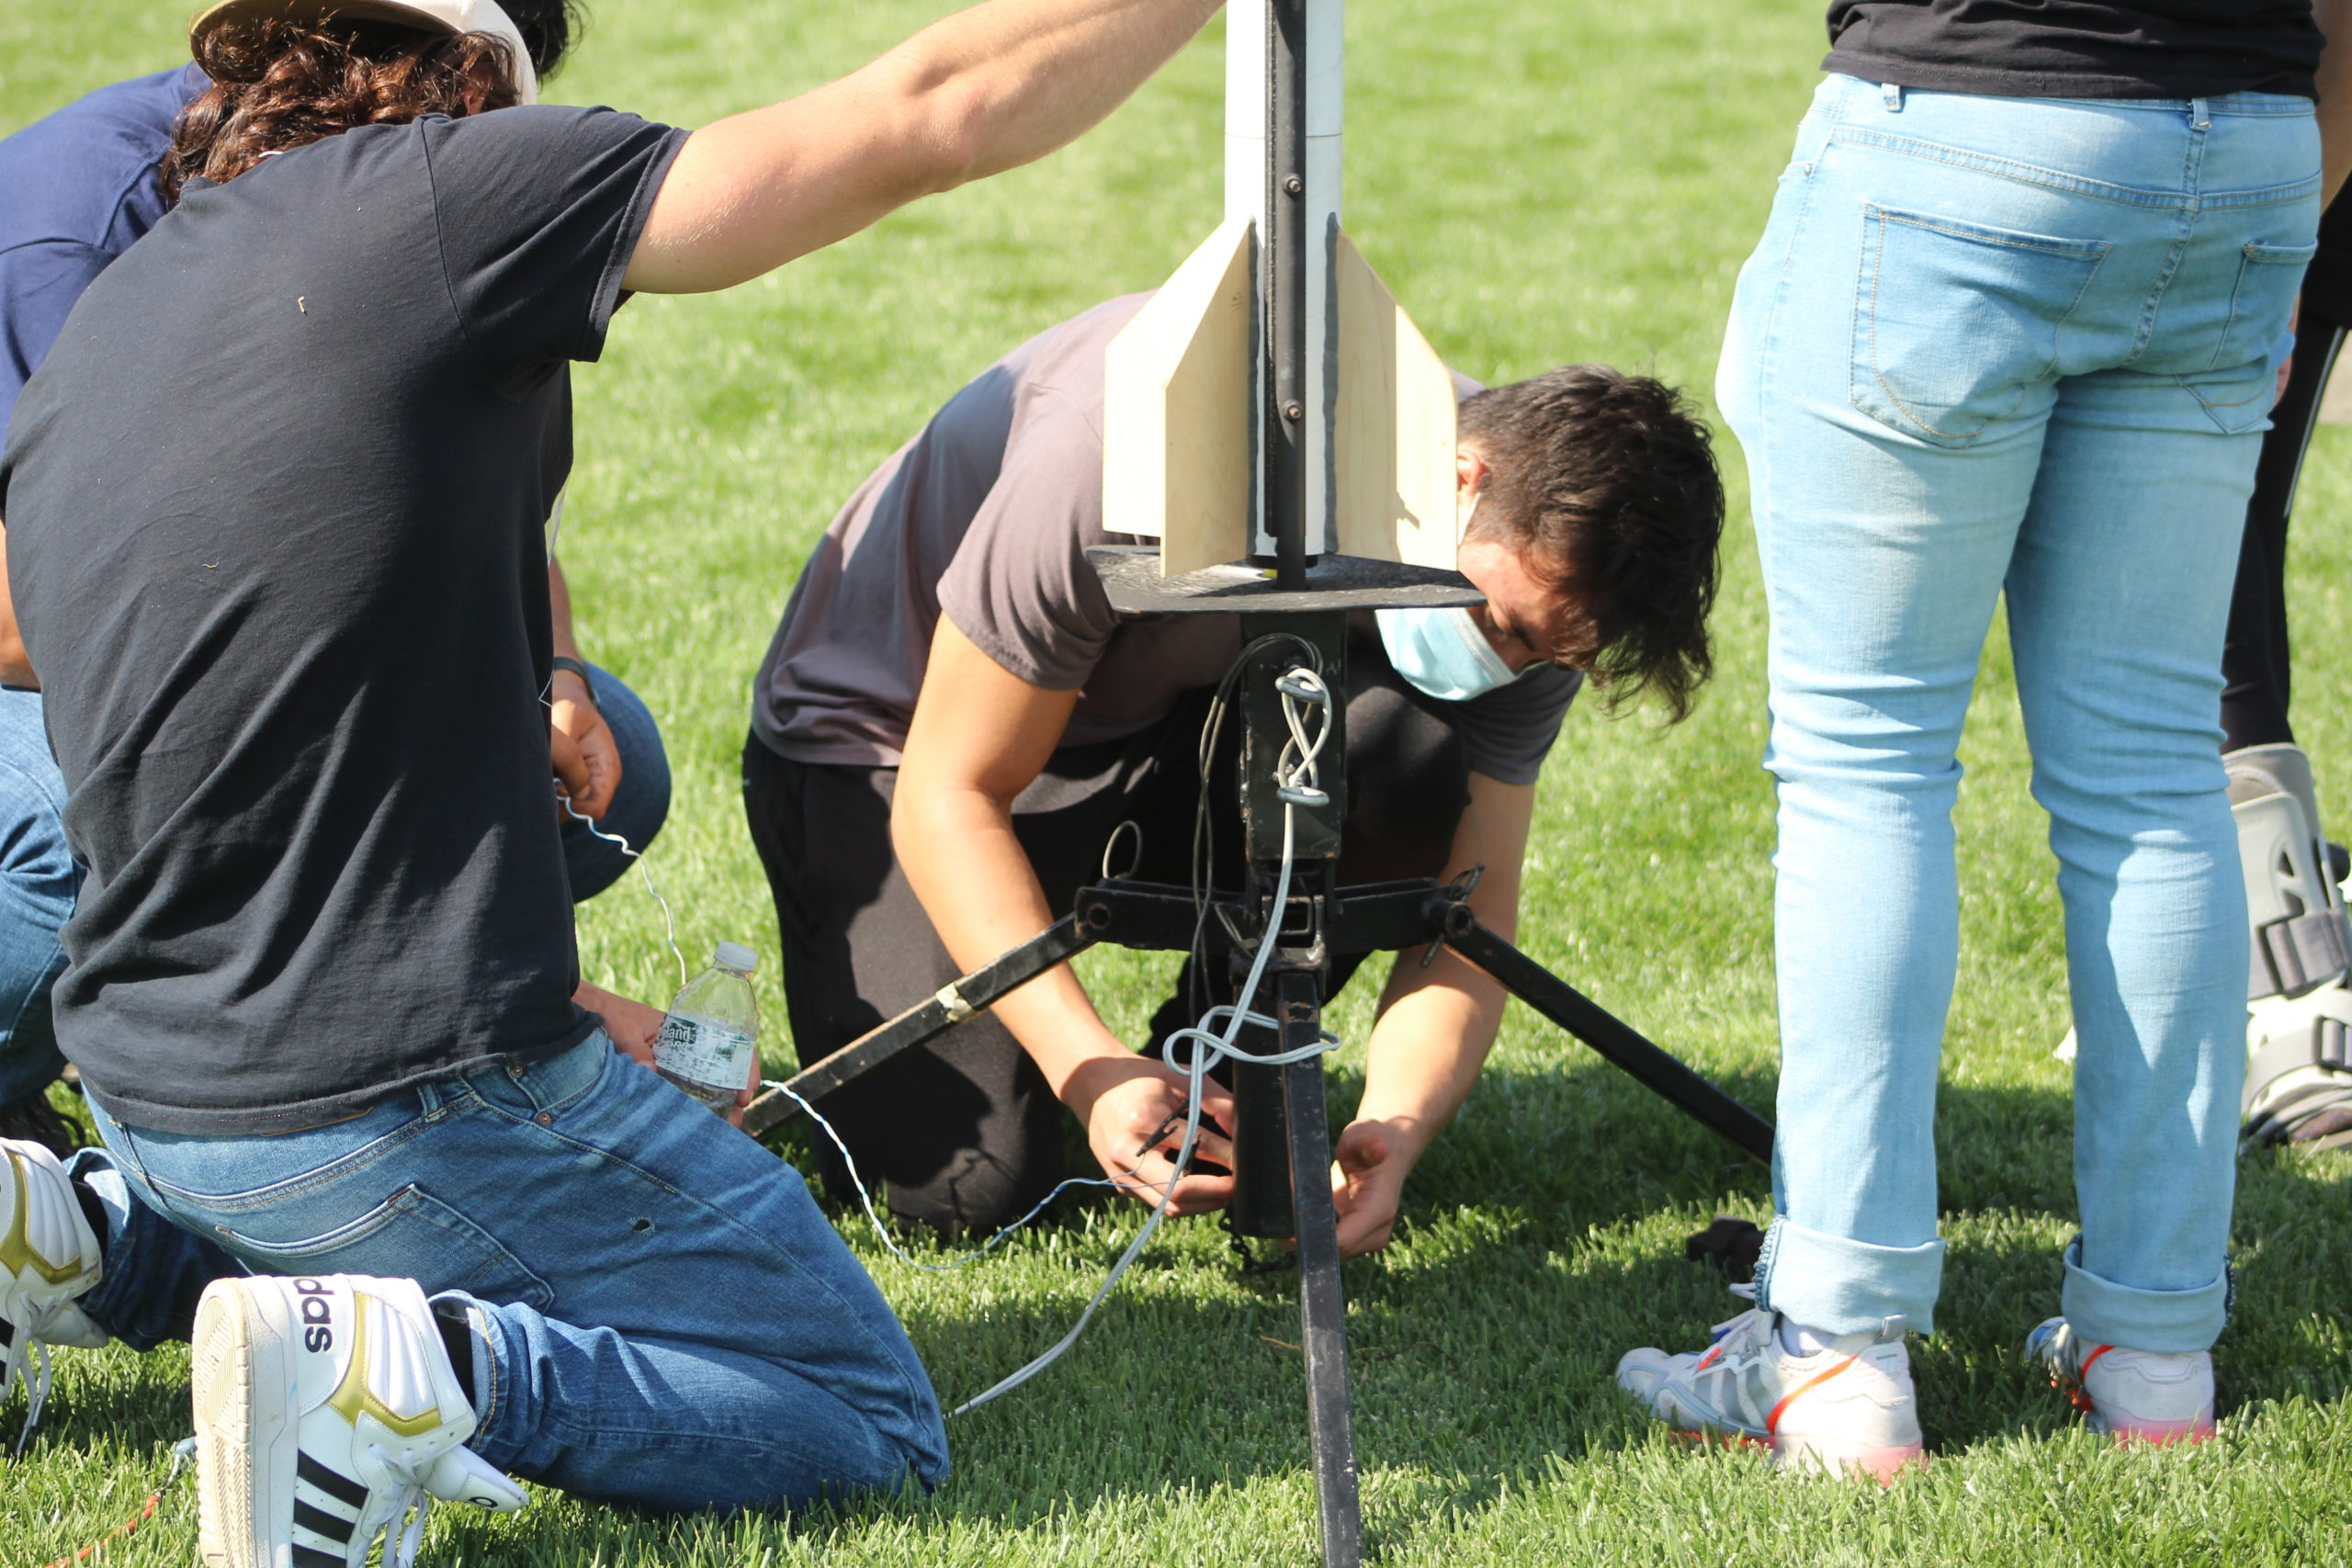 Students setting up a rocket for launch